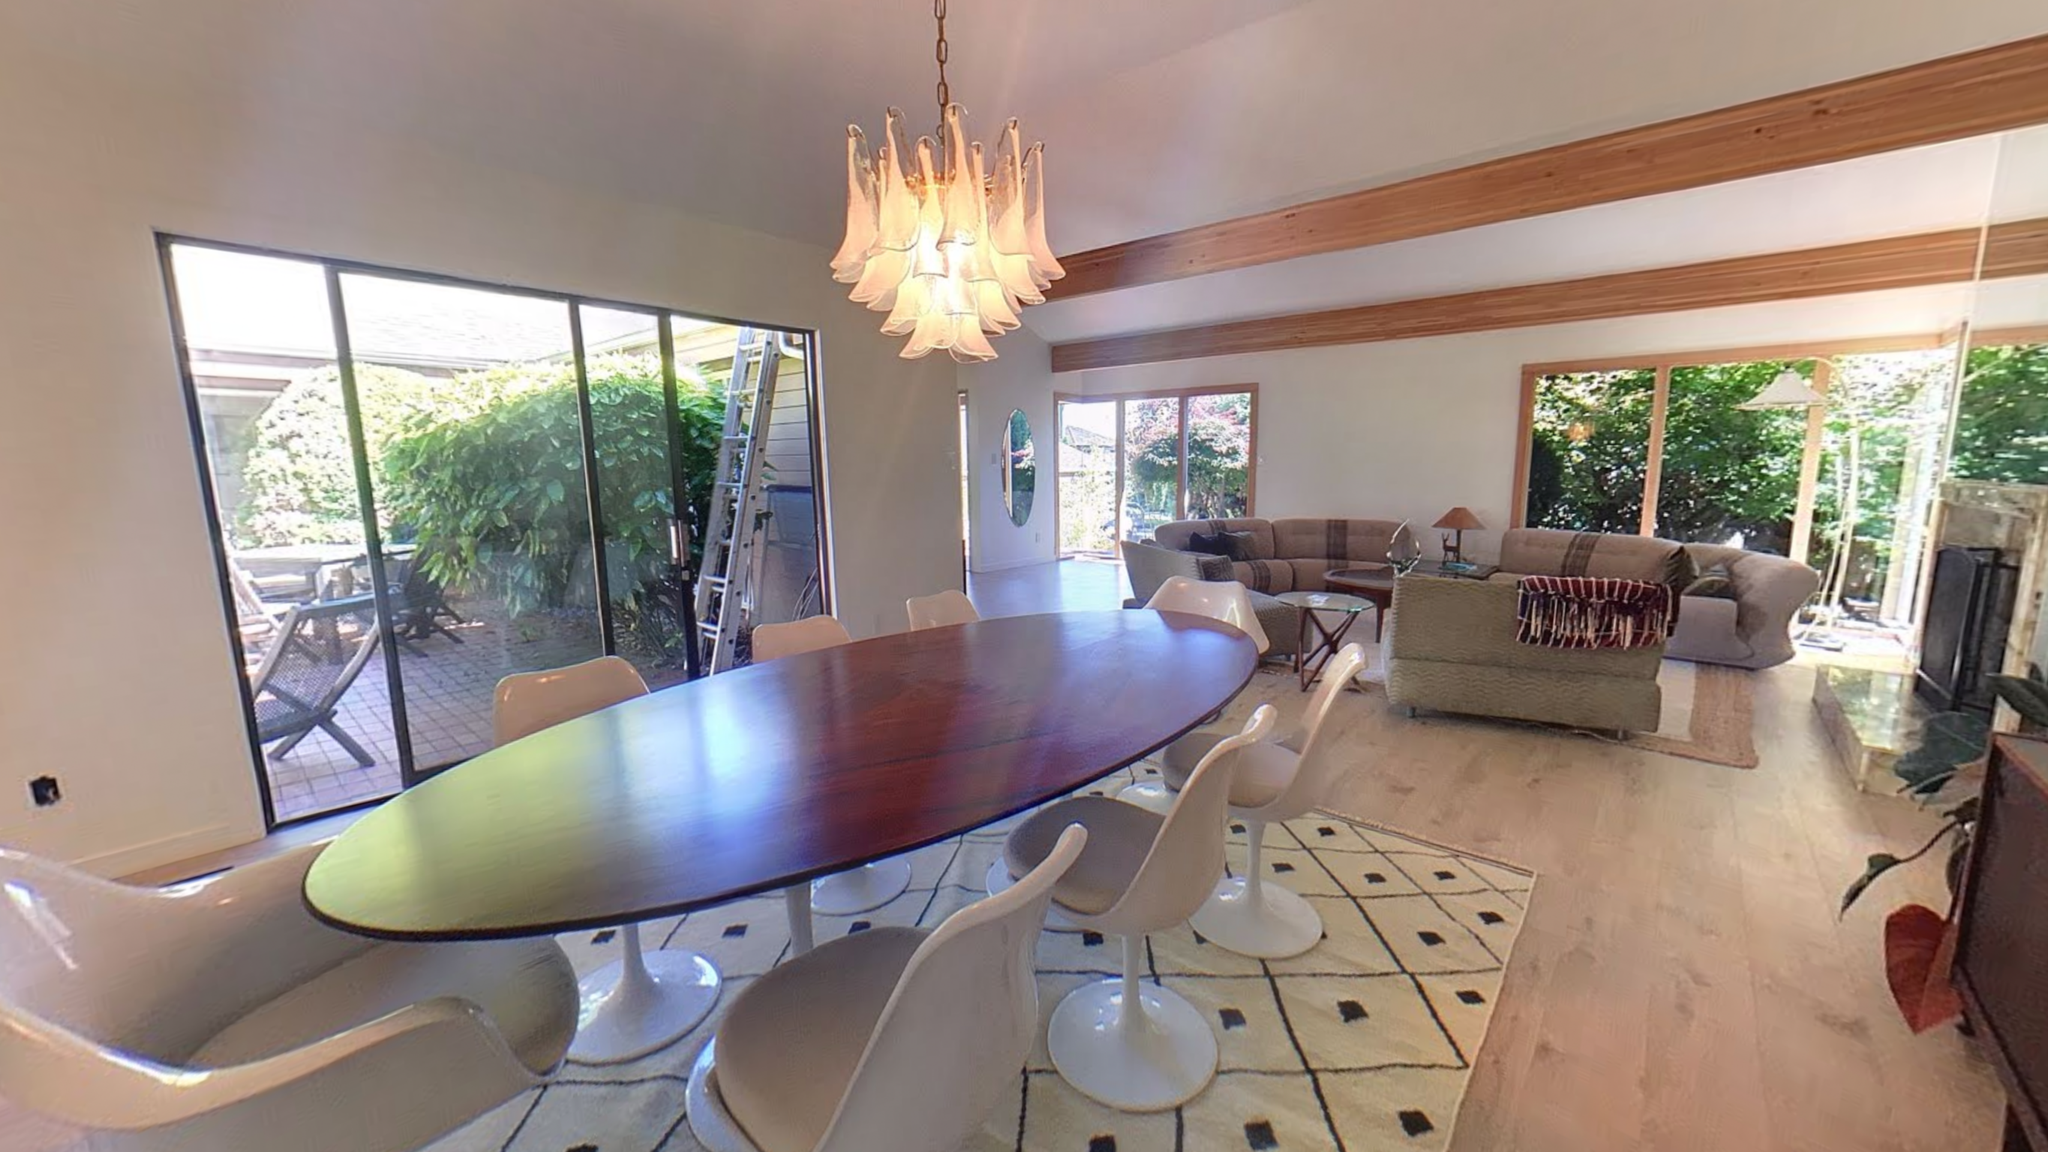 South Granville - Mid-Century Modern - Detached Home - Sophisticated living